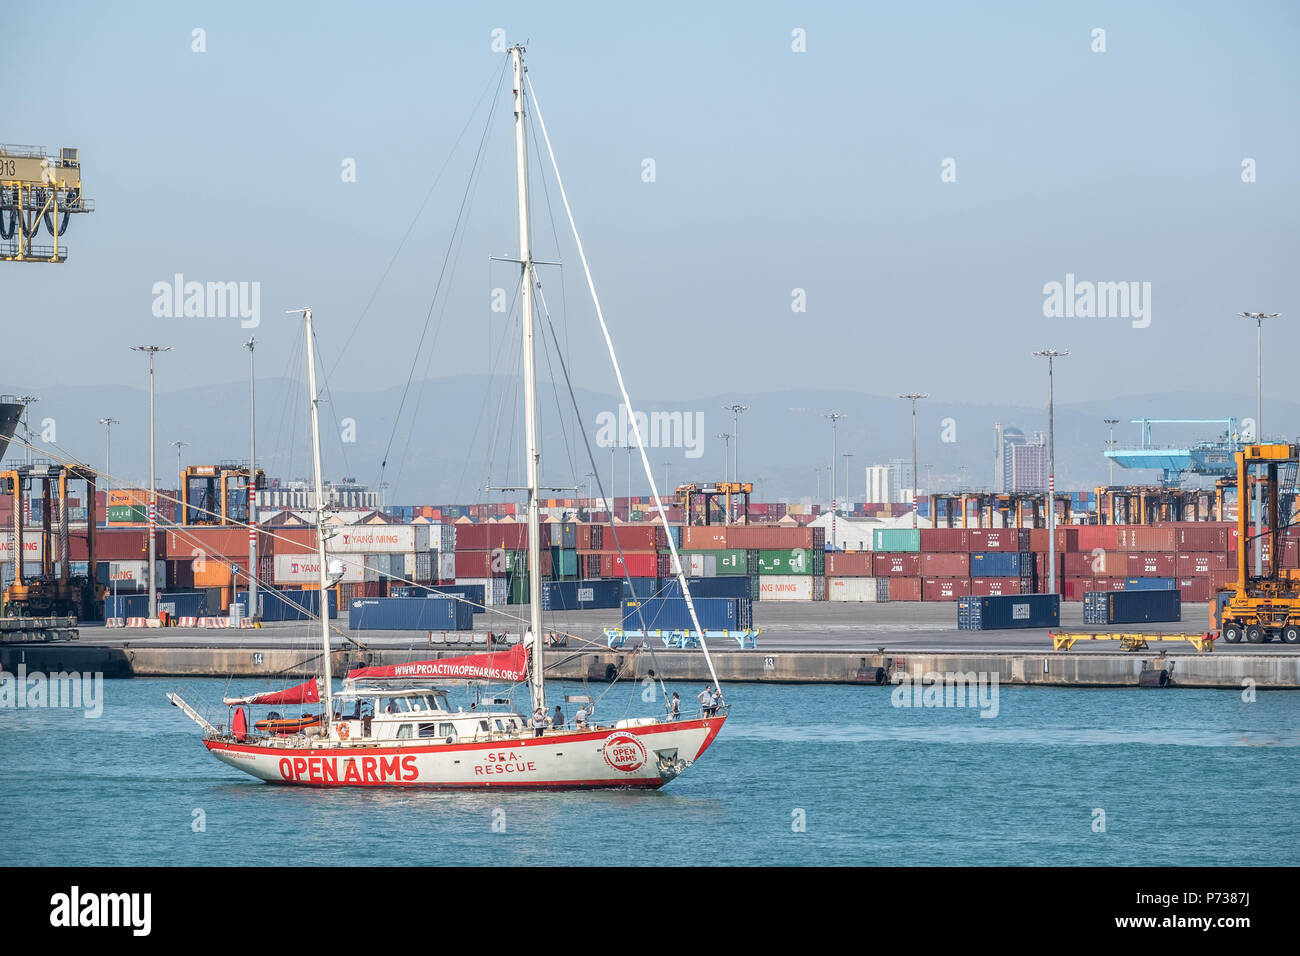 Barcelona, Catalonia, Spain. 4th July, 2018. The rescue sailing boat Proactiva Open Arms has docked in Barcelona with 60 people rescued in the Mediterranean off the coast of Libya. Barcelona has offered itself as a refuge city after Italy's refusal to continue hosting more rescues carried out by NGOs. Credit: Paco Freire/SOPA Images/ZUMA Wire/Alamy Live News Stock Photo